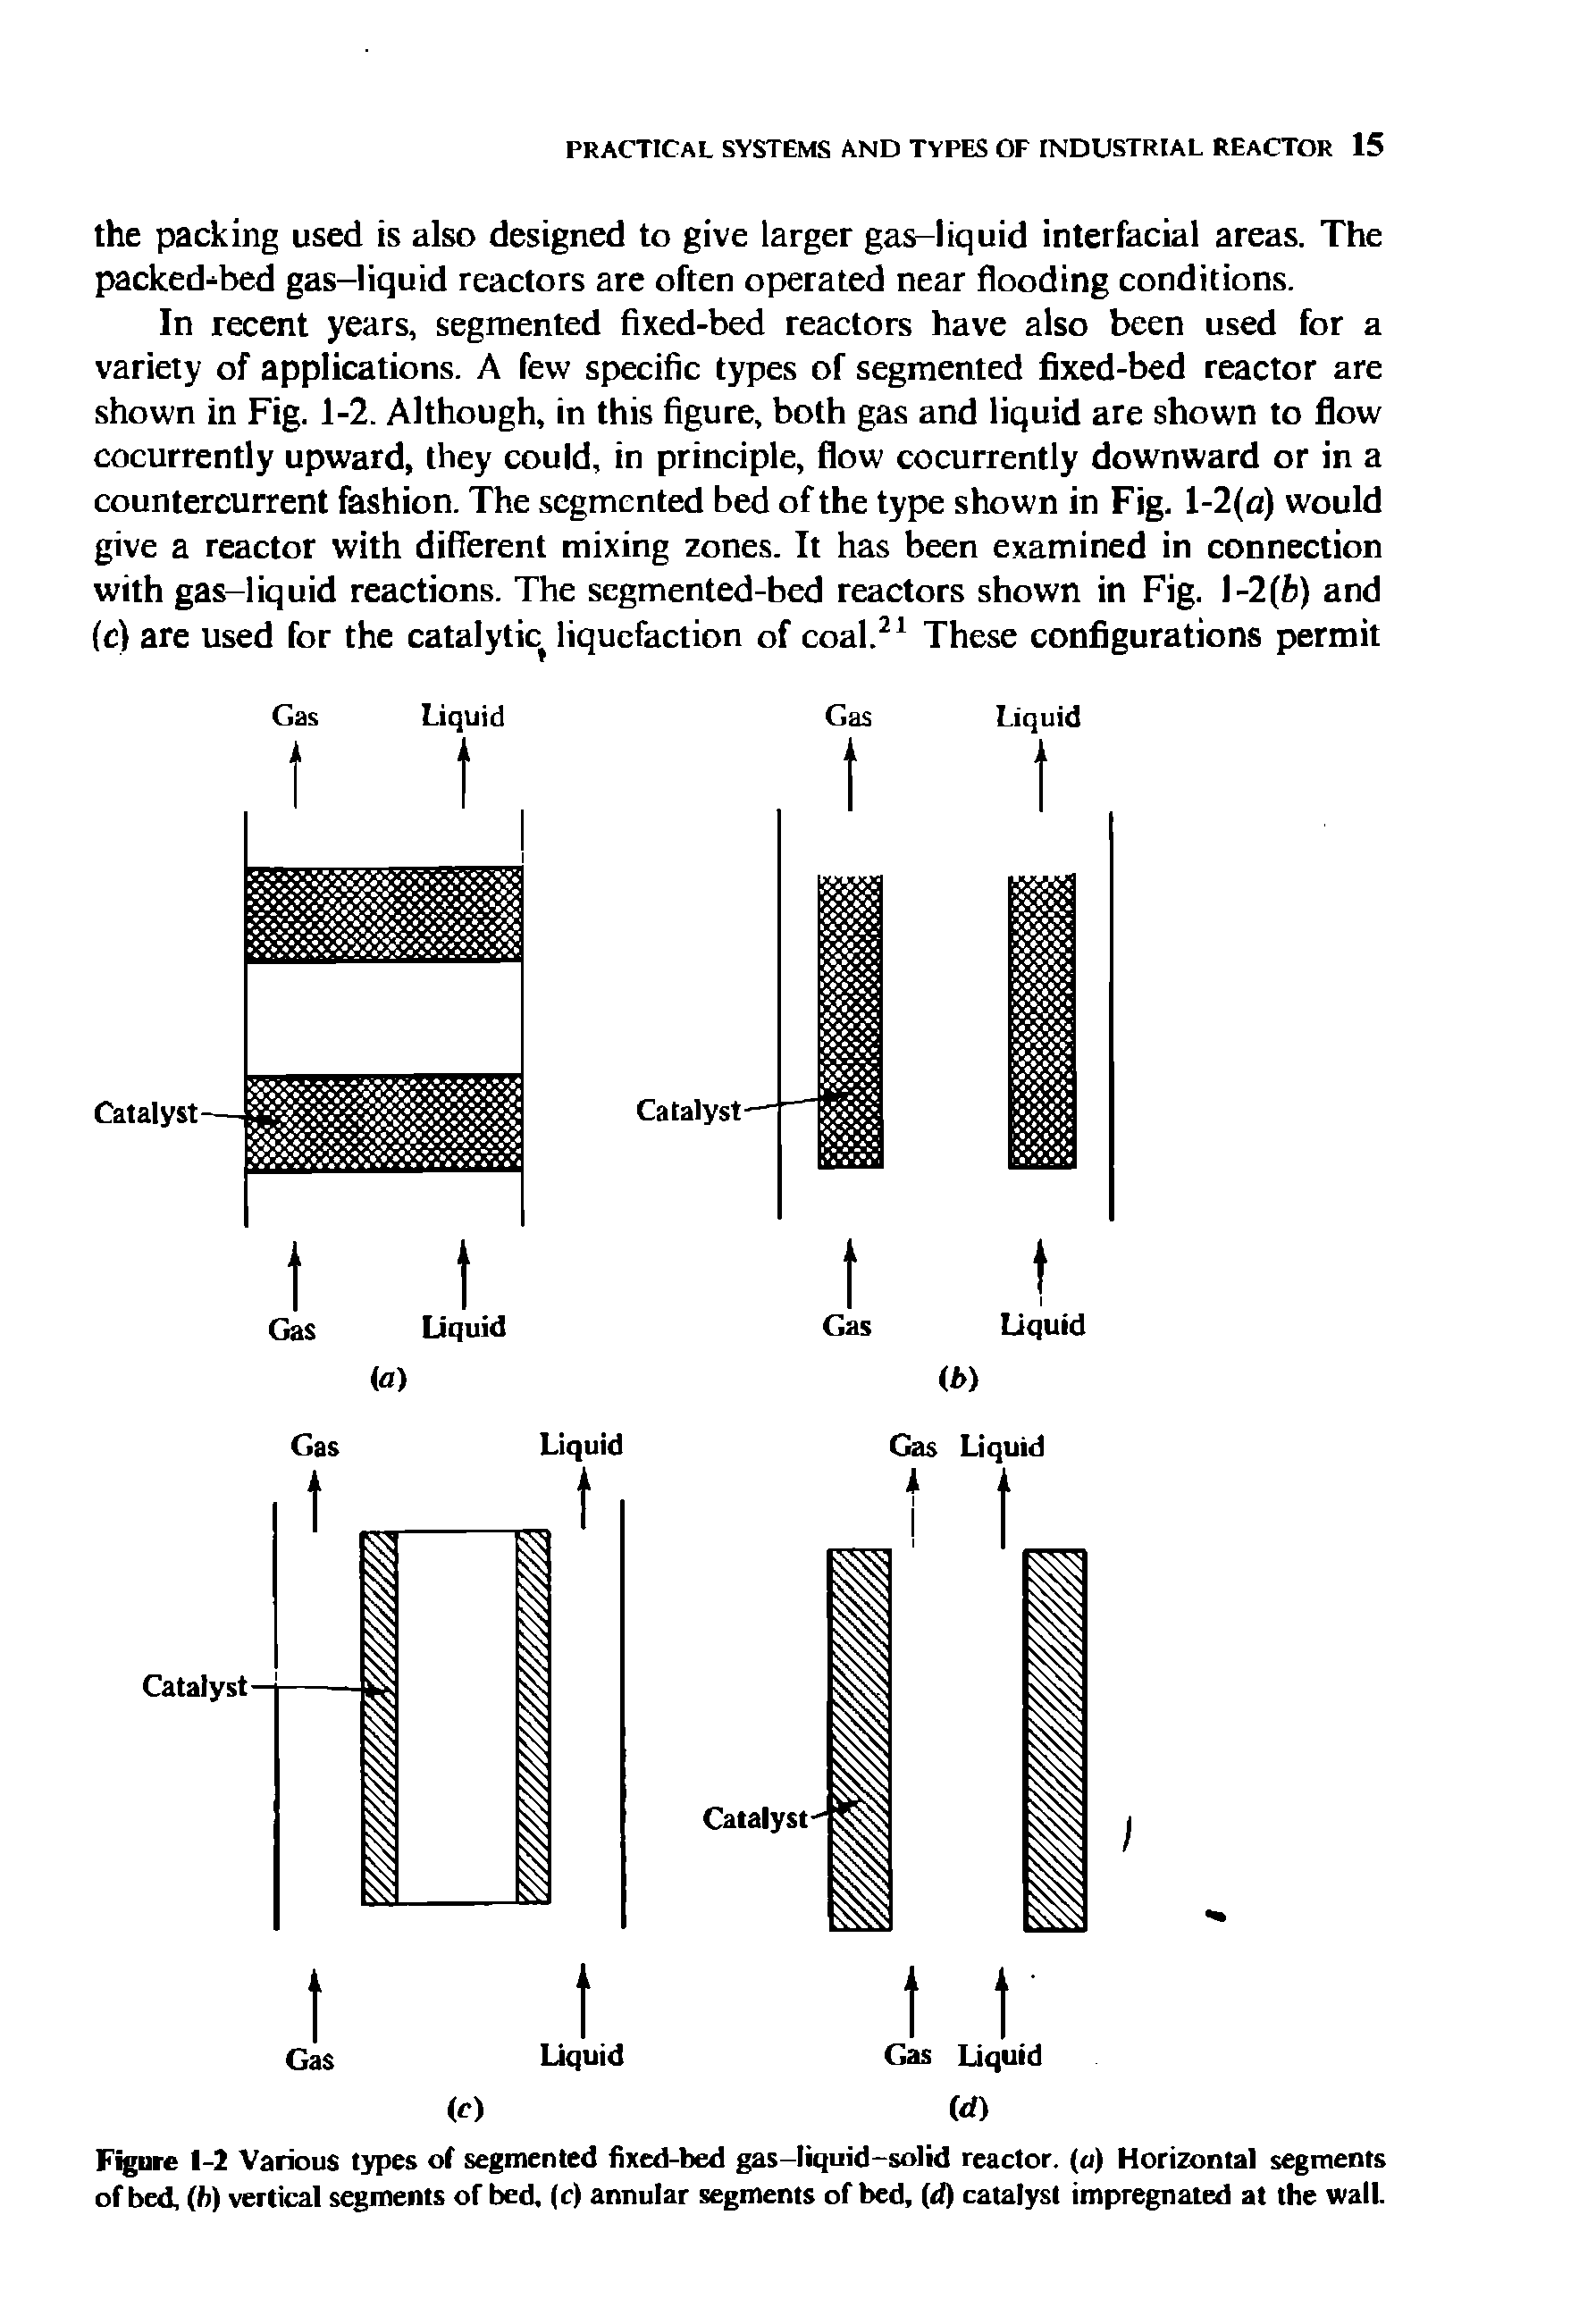 Figure 1-1 Various types of segmented fixed-bed gas-liquid-solid reactor, (a) Horizontal segments of bed, (h) vertical segments of bed, (c) annular segments of bed, (d) catalyst impregnated at the wall.